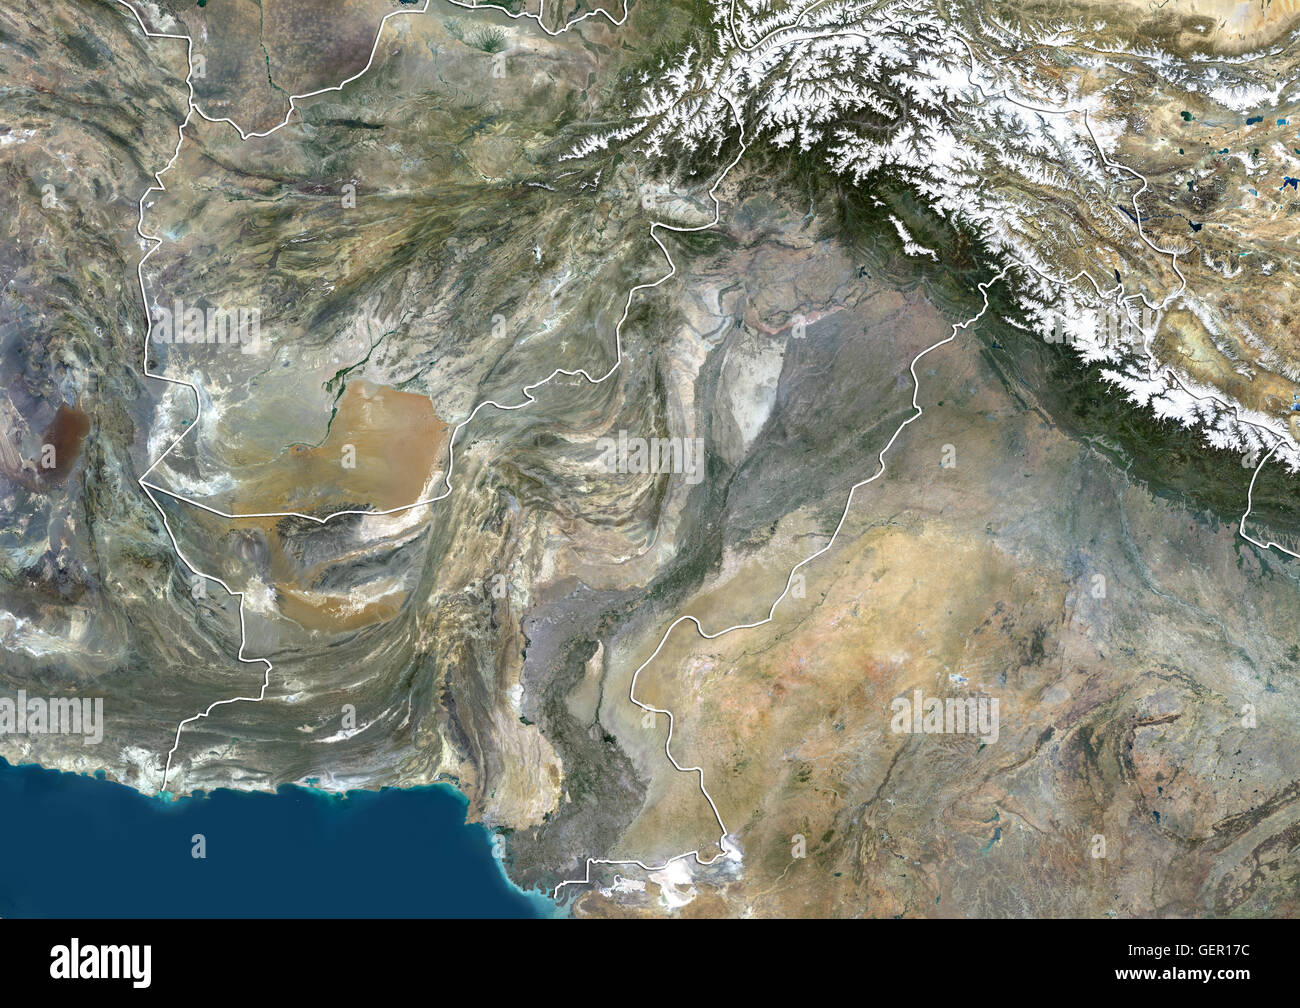 Satellite view of Pakistan (with country boundaries) showing disputed boundaries with India. This image was compiled from data acquired by Landsat 8 satellite in 2014. Stock Photo